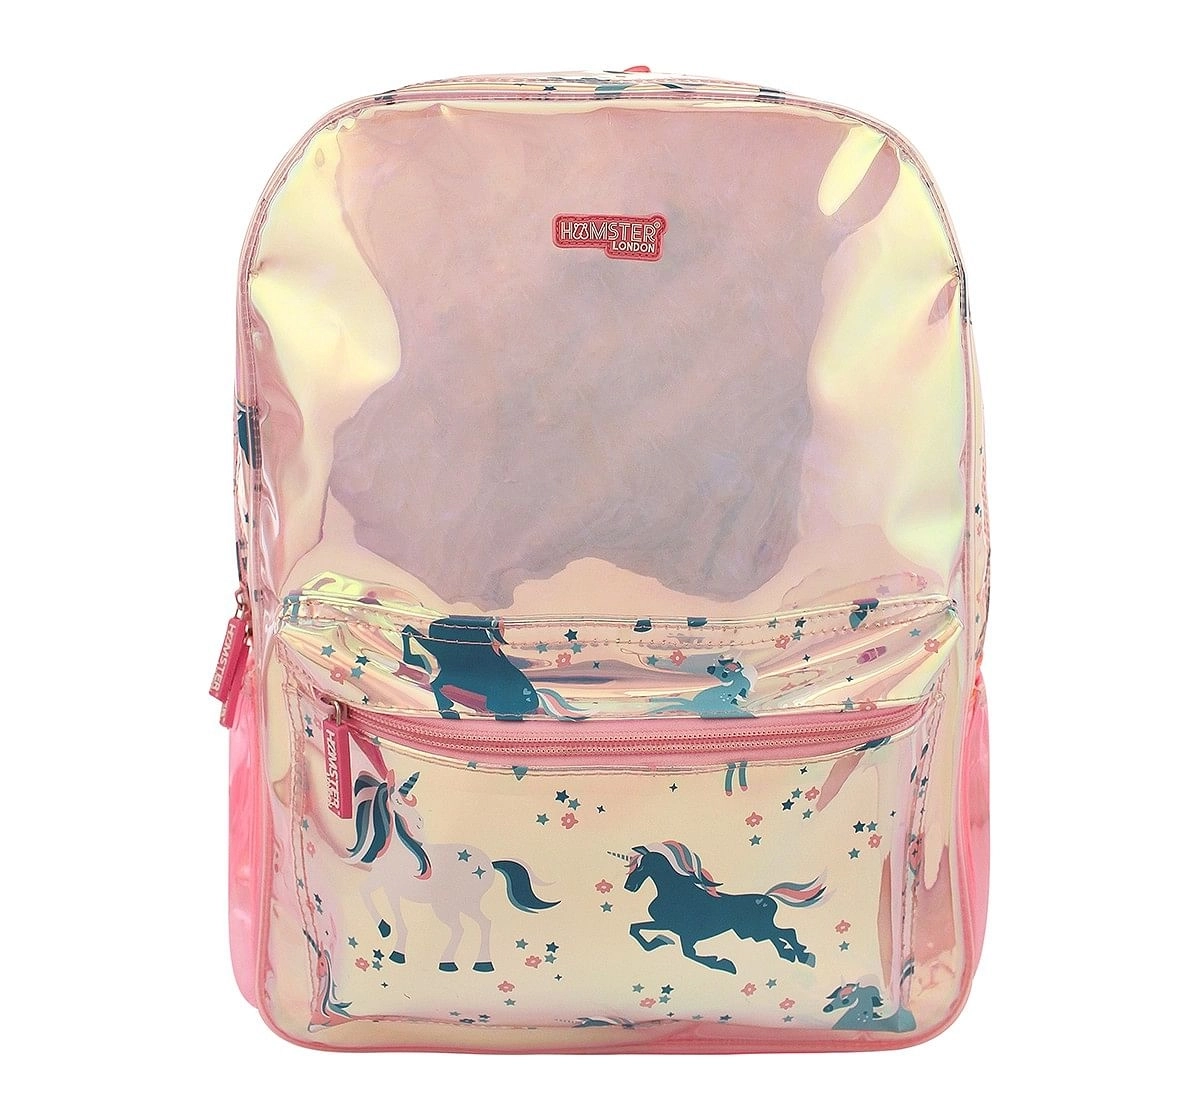 Hamster London Big Unicorn Backpack for age 3Y+ (Pink)